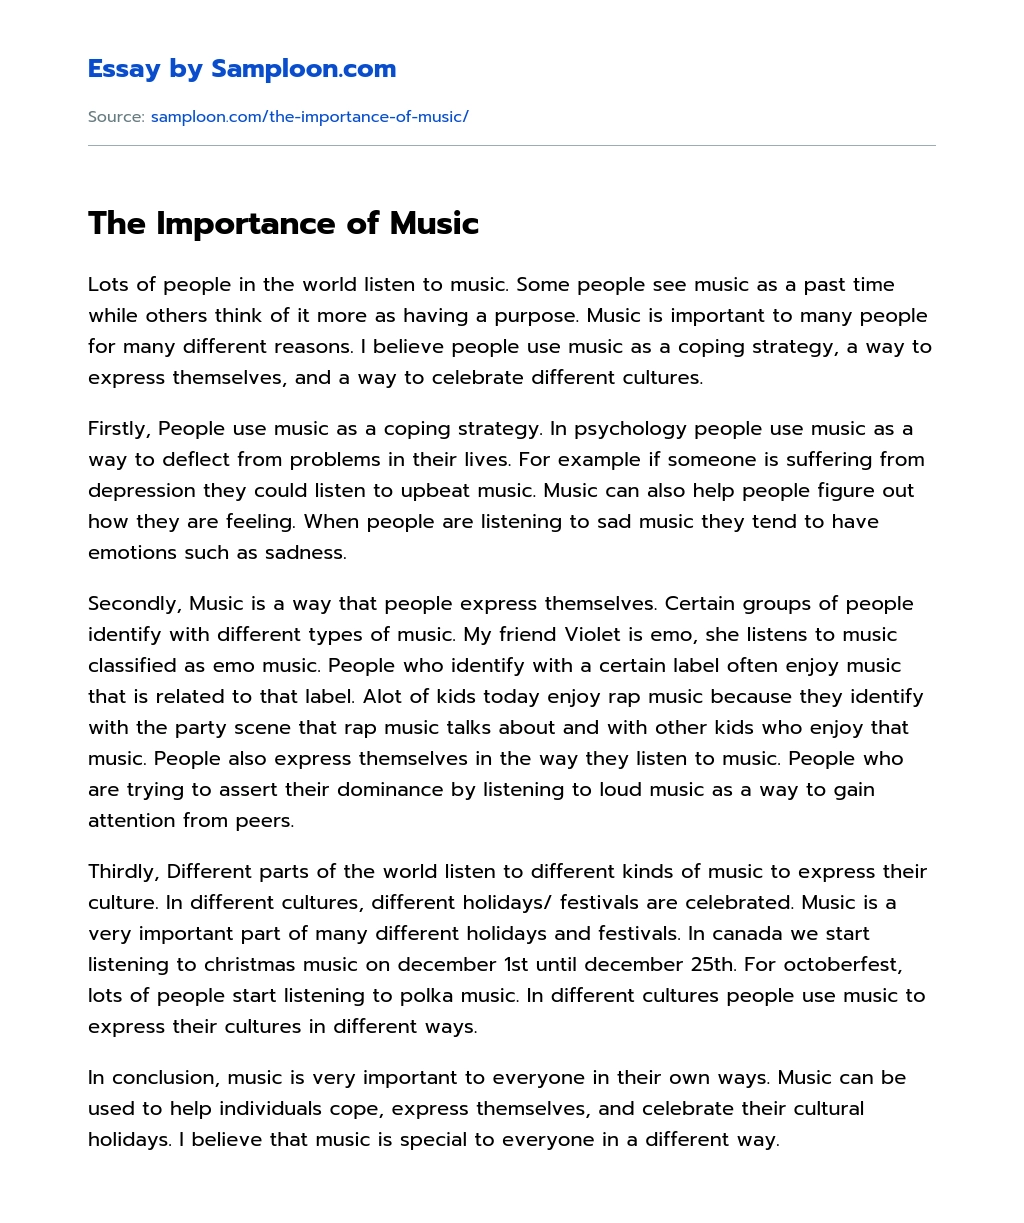 The Importance of Music essay